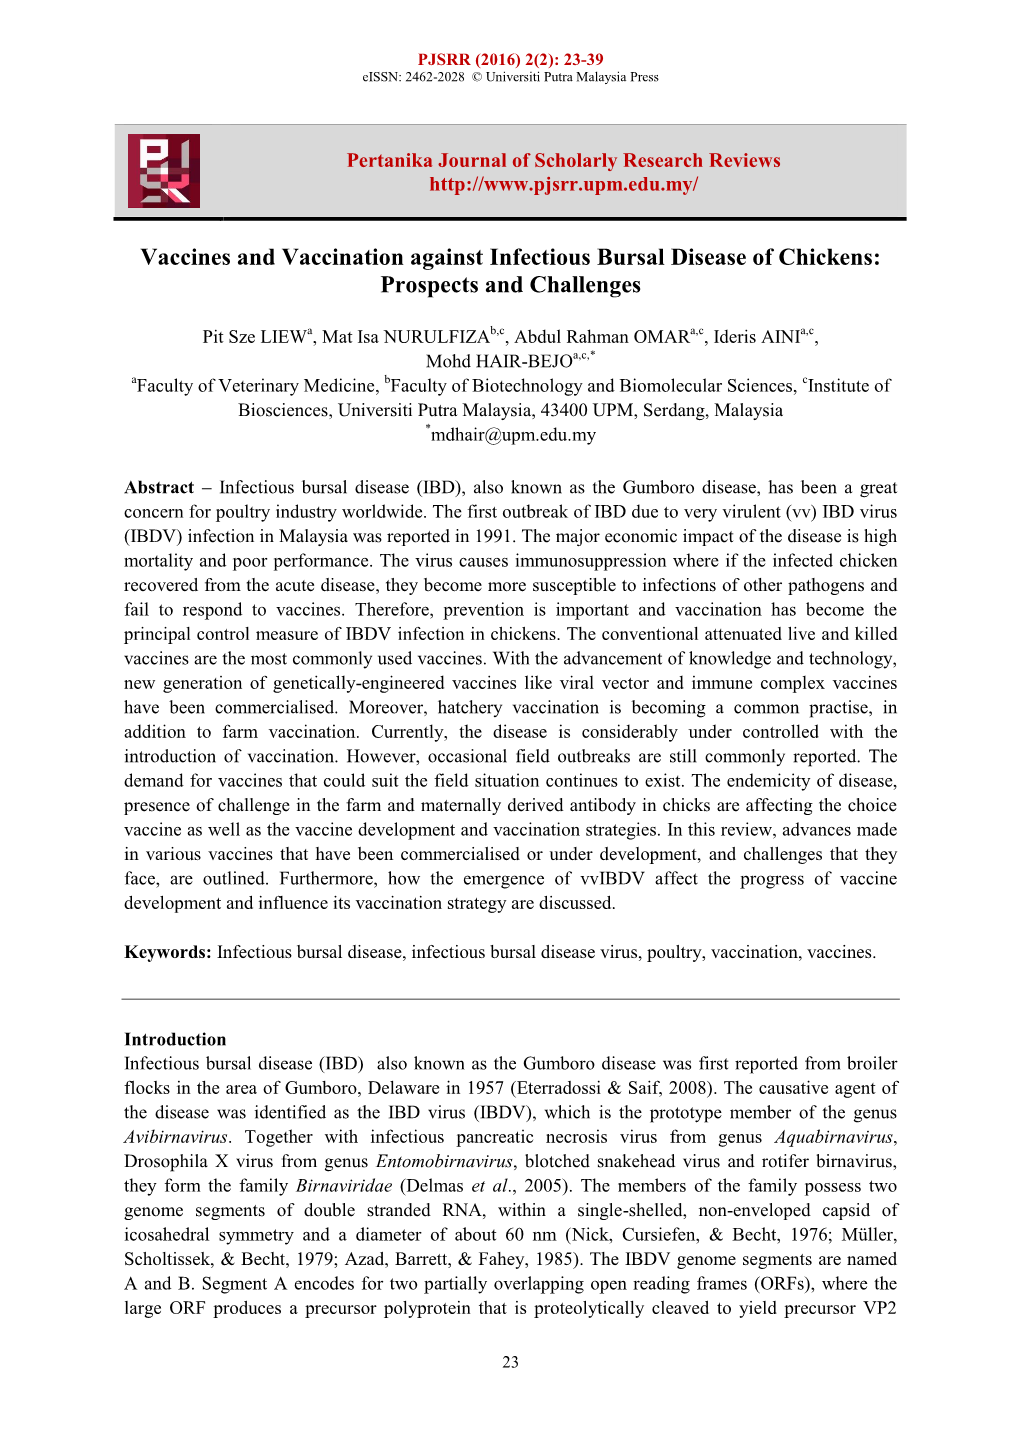 Vaccines and Vaccination Against Infectious Bursal Disease of Chickens: Prospects and Challenges